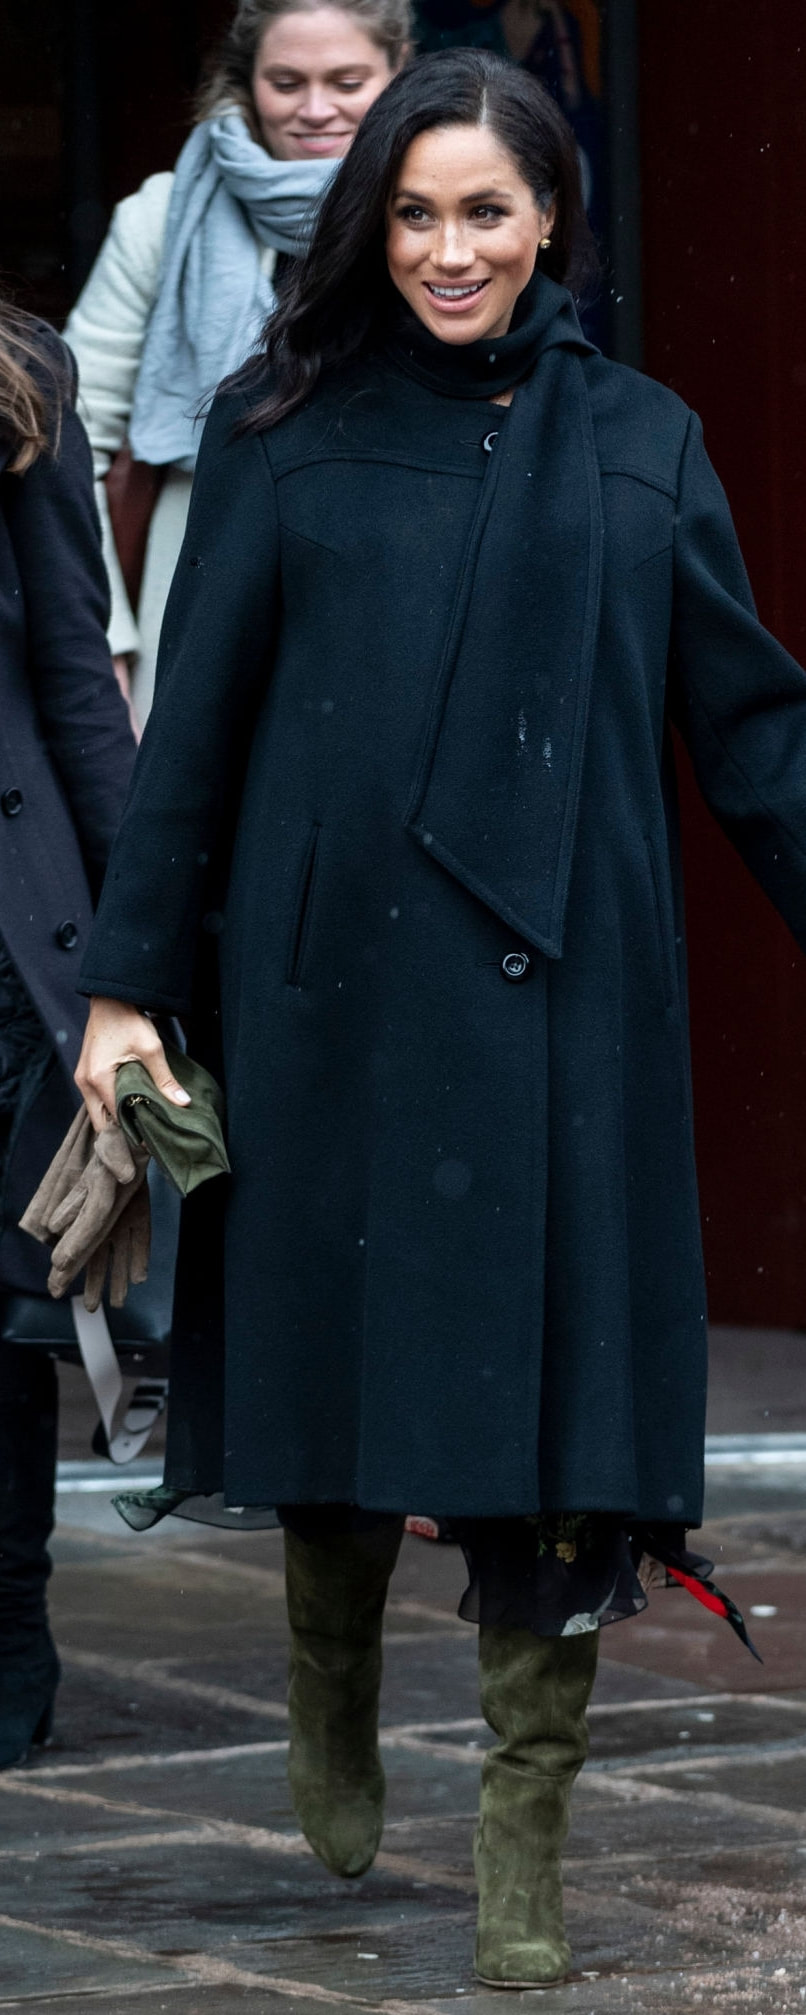 William Vintage Black 1960's Cashmere Coat with Scarf as seen on Meghan Markle, the Duchess of Sussex